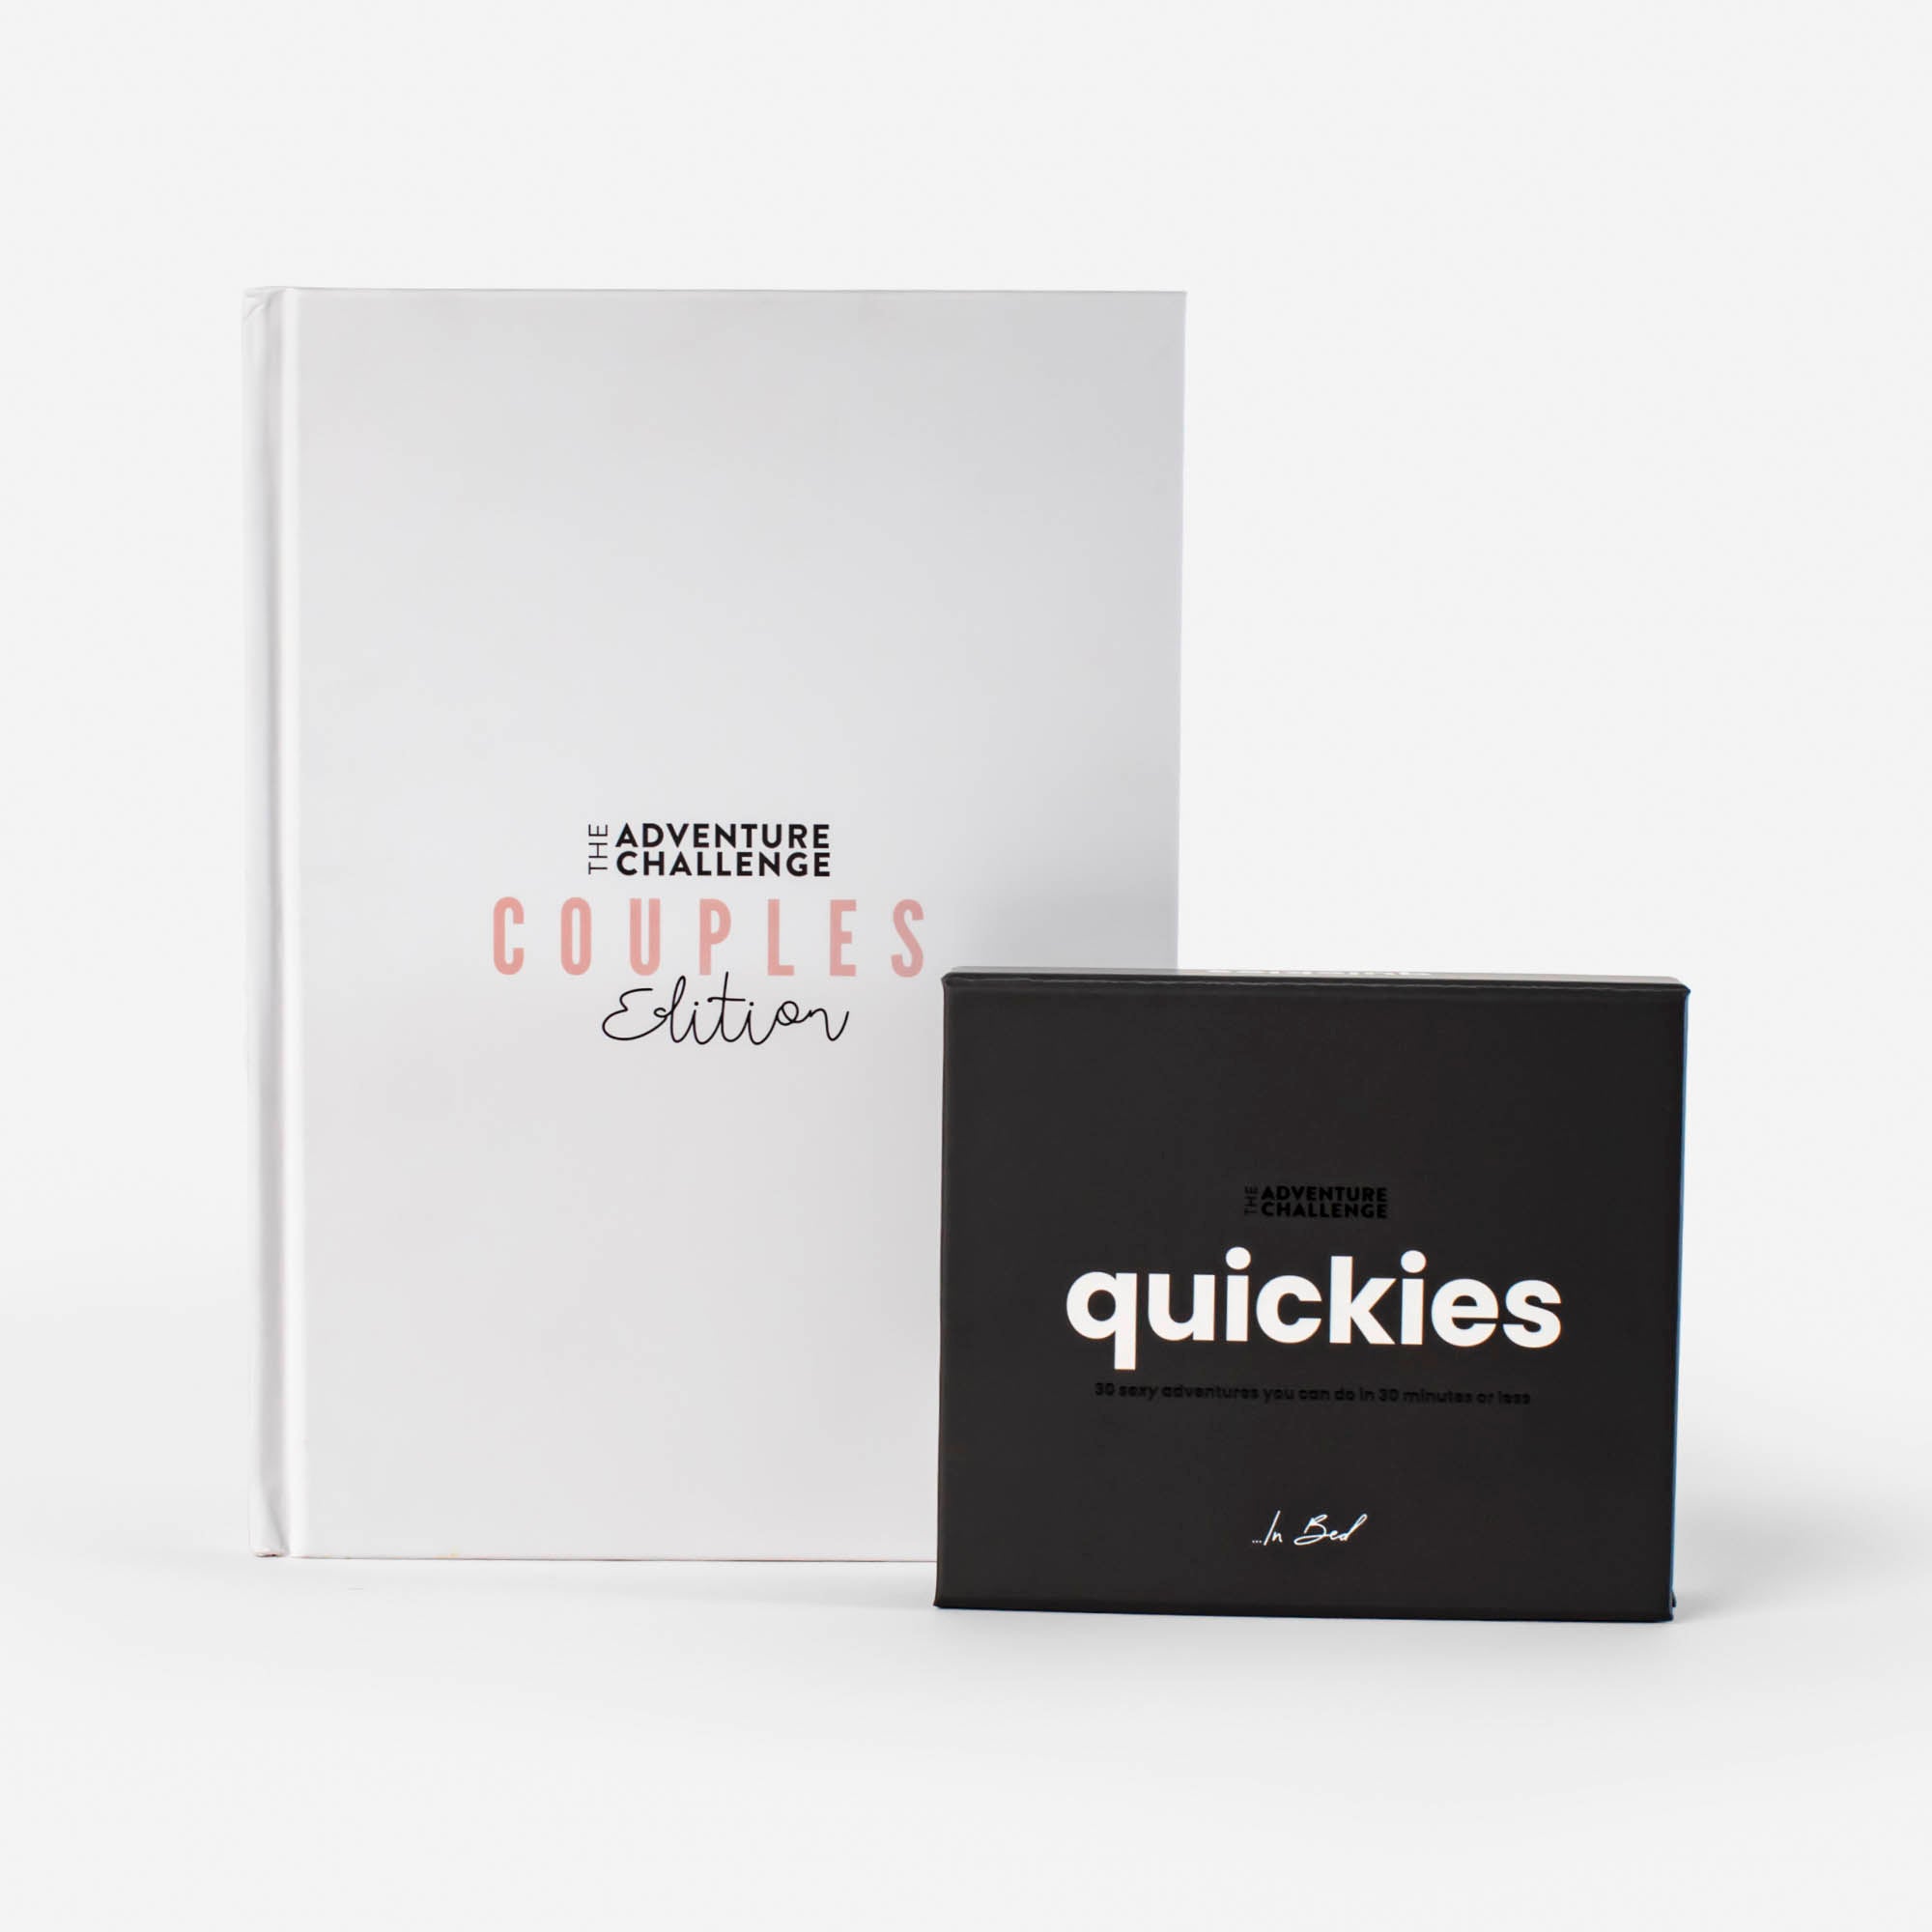 Quickies and Couples Bundle